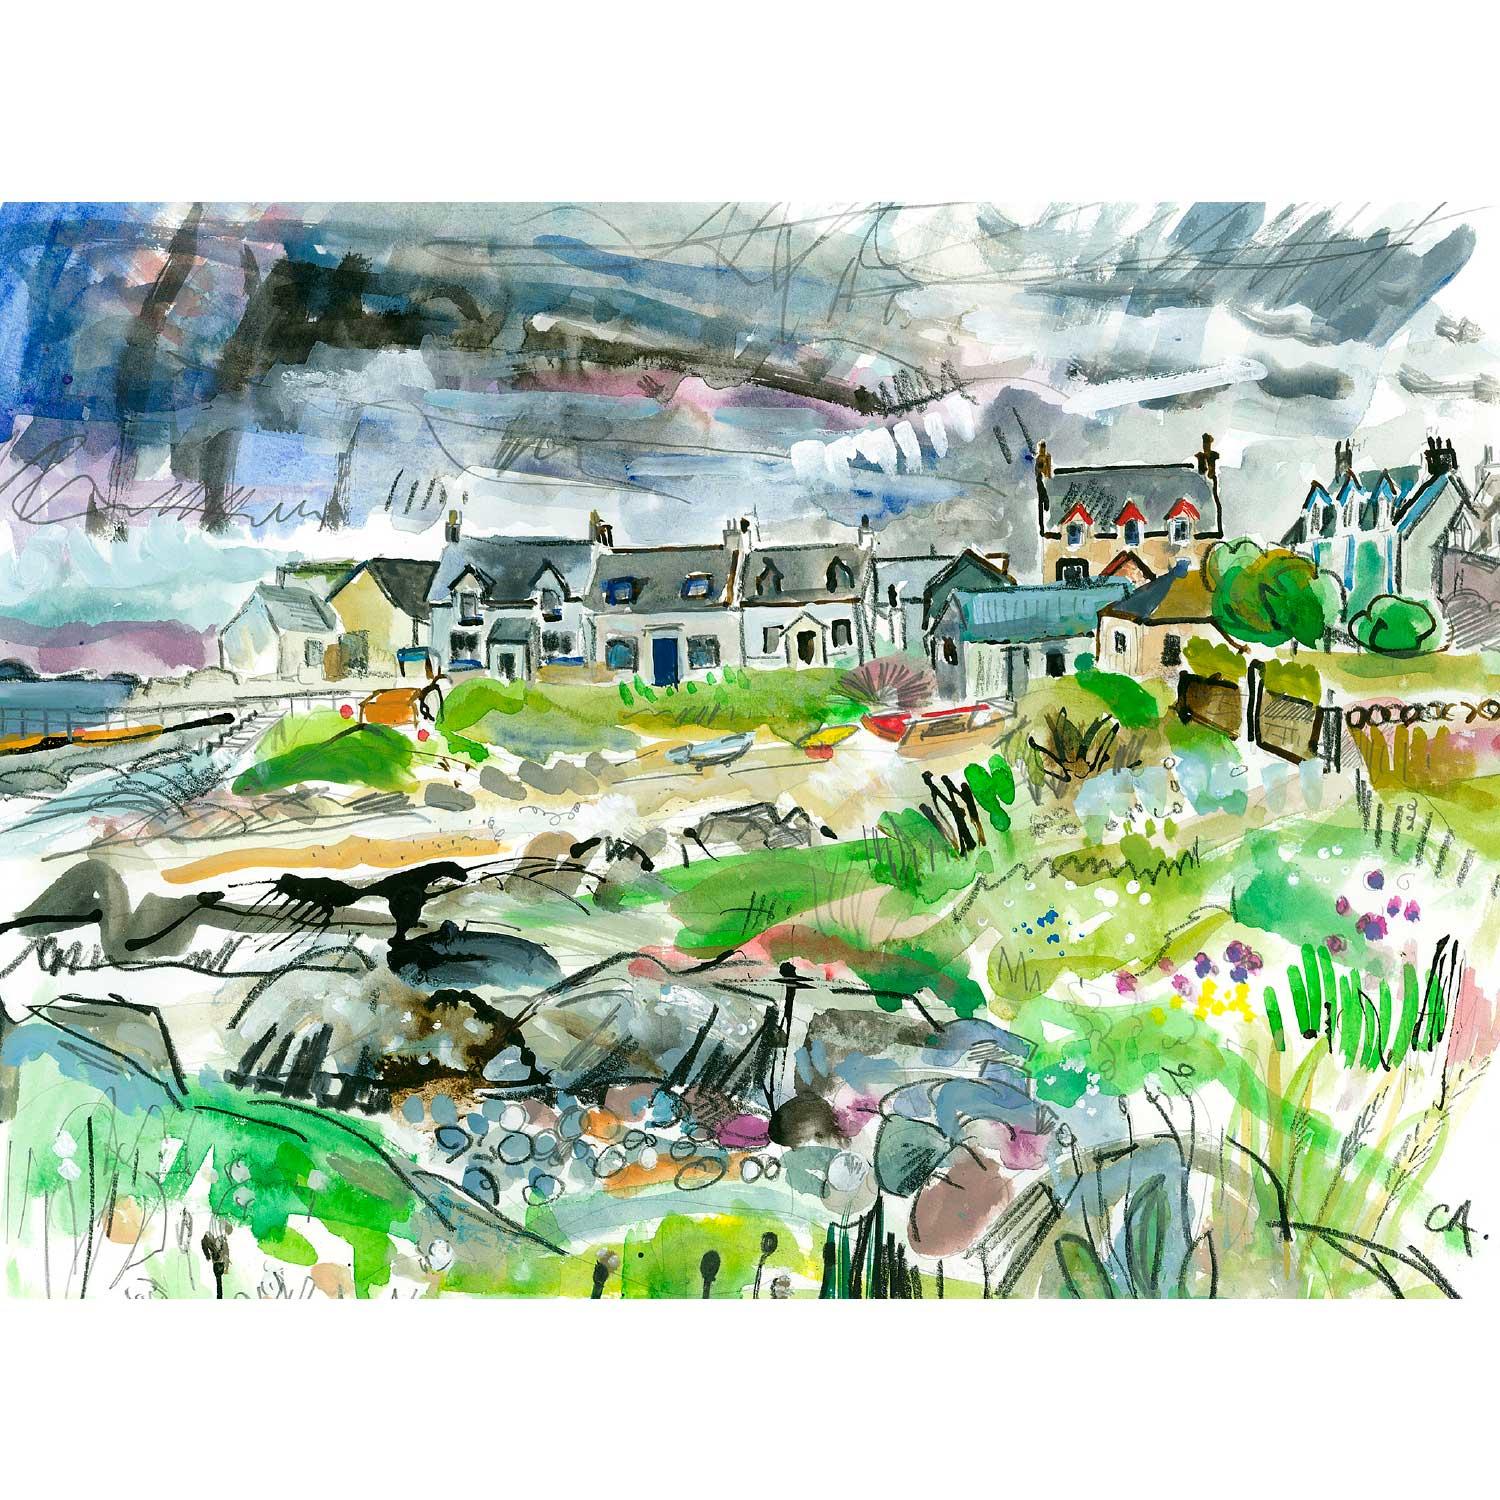 The Village, Iona by Clare Arbuthnott